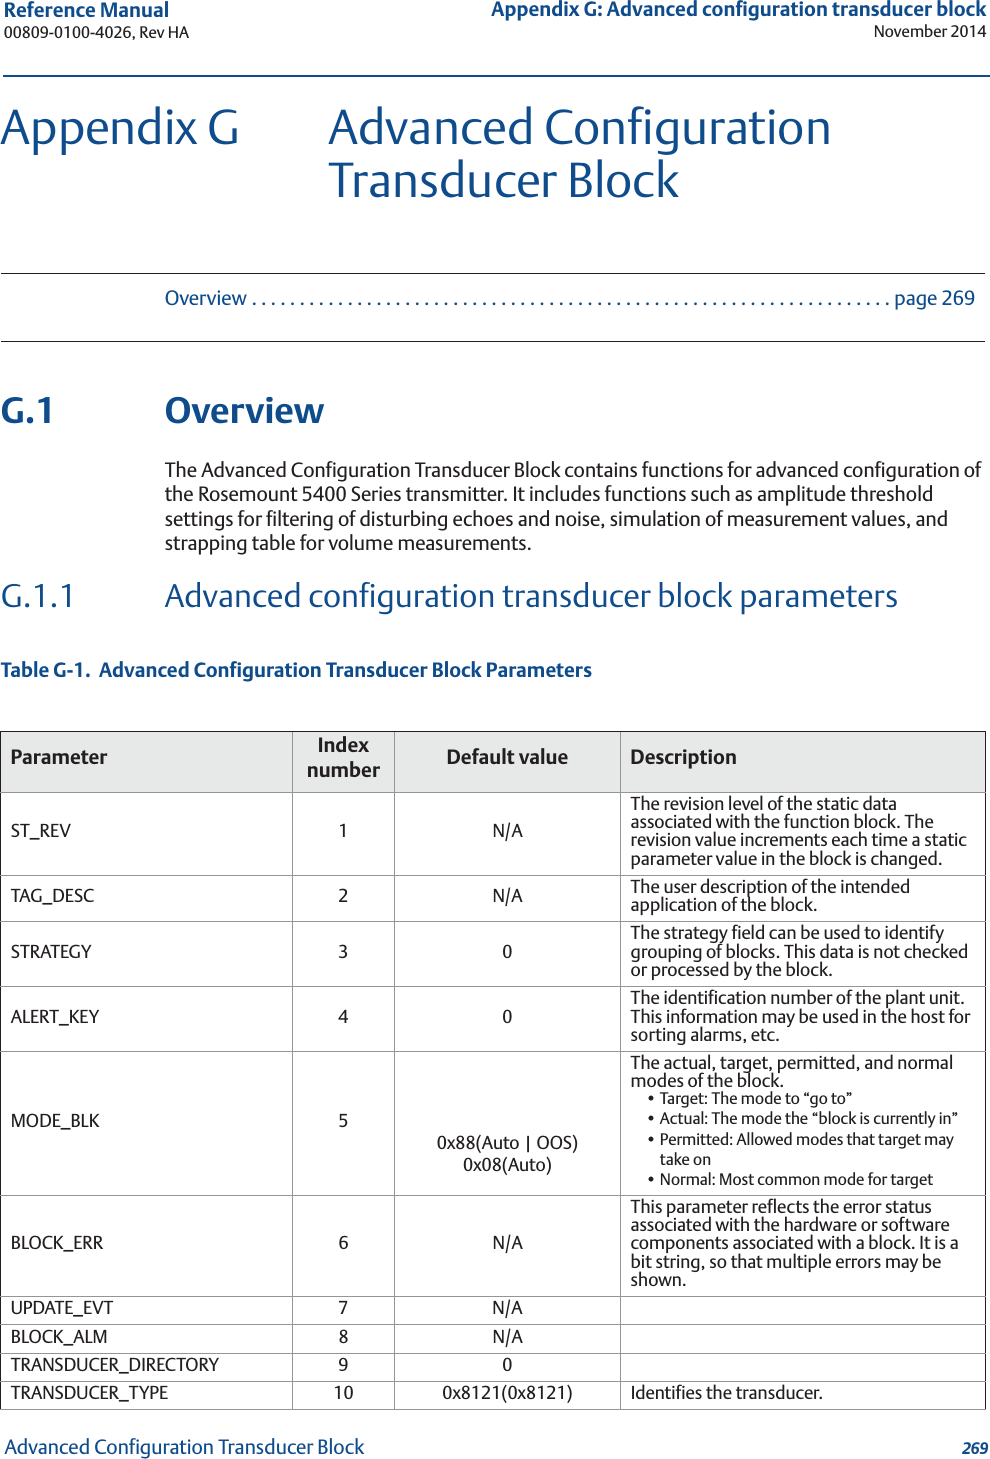 269Reference Manual 00809-0100-4026, Rev HAAppendix G: Advanced configuration transducer blockNovember 2014Advanced Configuration Transducer BlockAppendix G  Advanced Configuration Transducer BlockOverview . . . . . . . . . . . . . . . . . . . . . . . . . . . . . . . . . . . . . . . . . . . . . . . . . . . . . . . . . . . . . . . . . . . page 269G.1 OverviewThe Advanced Configuration Transducer Block contains functions for advanced configuration of the Rosemount 5400 Series transmitter. It includes functions such as amplitude threshold settings for filtering of disturbing echoes and noise, simulation of measurement values, and strapping table for volume measurements.G.1.1 Advanced configuration transducer block parametersTable G-1.  Advanced Configuration Transducer Block ParametersParameter Index number Default value DescriptionST_REV 1 N/AThe revision level of the static data associated with the function block. The revision value increments each time a static parameter value in the block is changed.TAG_DESC 2 N/A The user description of the intended application of the block.STRATEGY 3 0 The strategy field can be used to identify grouping of blocks. This data is not checked or processed by the block.ALERT_KEY 4 0 The identification number of the plant unit. This information may be used in the host for sorting alarms, etc.MODE_BLK 50x88(Auto | OOS)0x08(Auto)The actual, target, permitted, and normal modes of the block.• Target: The mode to “go to”• Actual: The mode the “block is currently in”• Permitted: Allowed modes that target may take on• Normal: Most common mode for targetBLOCK_ERR 6 N/AThis parameter reflects the error status associated with the hardware or software components associated with a block. It is a bit string, so that multiple errors may be shown.UPDATE_EVT 7 N/ABLOCK_ALM 8 N/ATRANSDUCER_DIRECTORY 9 0TRANSDUCER_TYPE 10 0x8121(0x8121) Identifies the transducer.